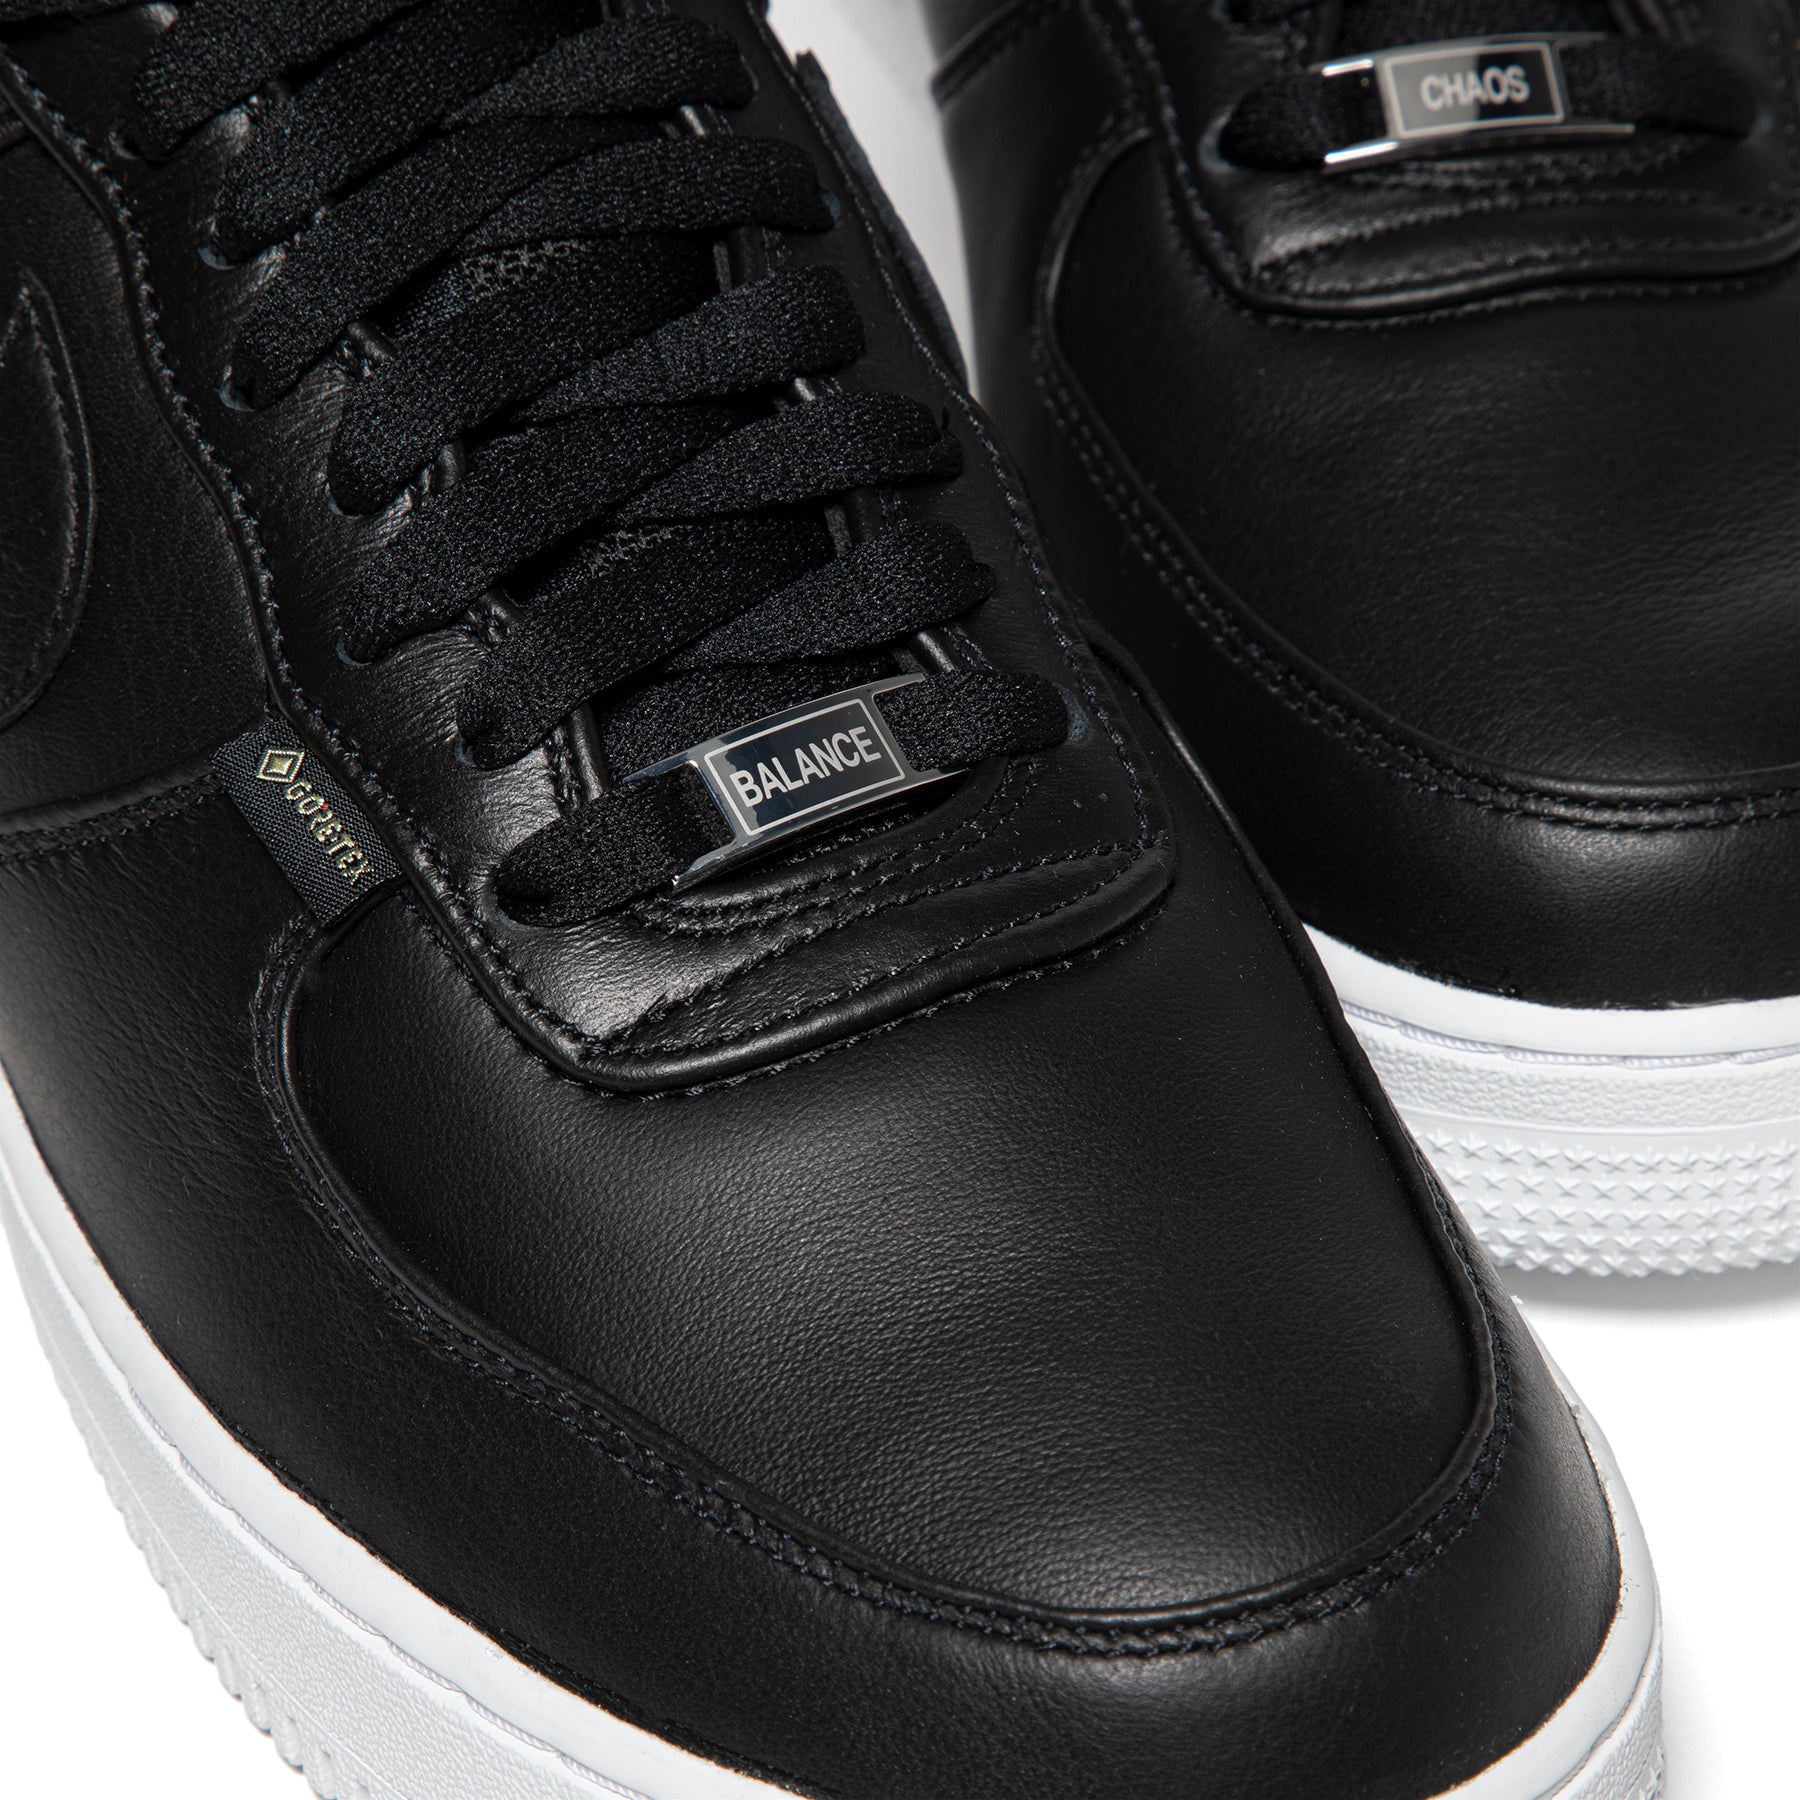 Buy Undercover x Air Force 1 Low SP GORE-TEX 'Grey Fog' - DQ7558